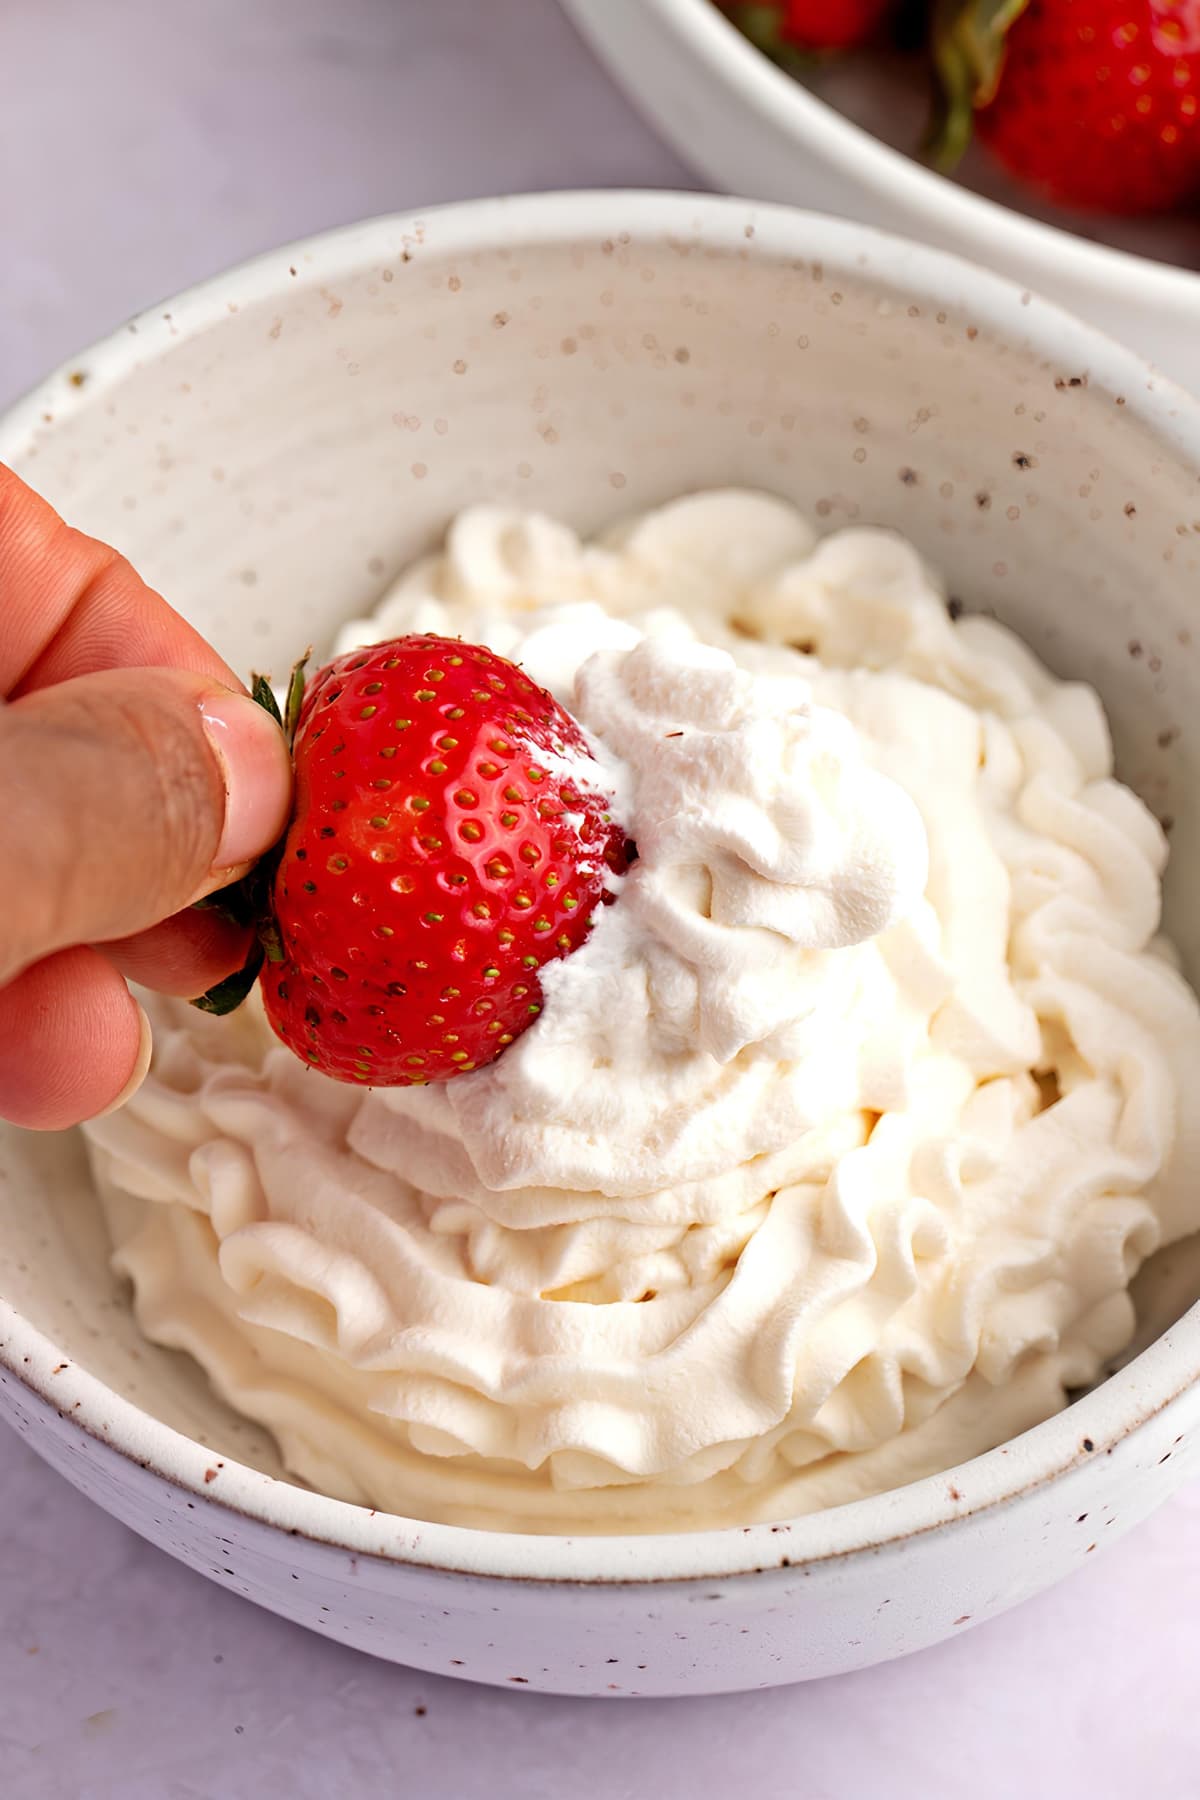 Woman Dipping Strawberry into a Bowl of Whipped Cream